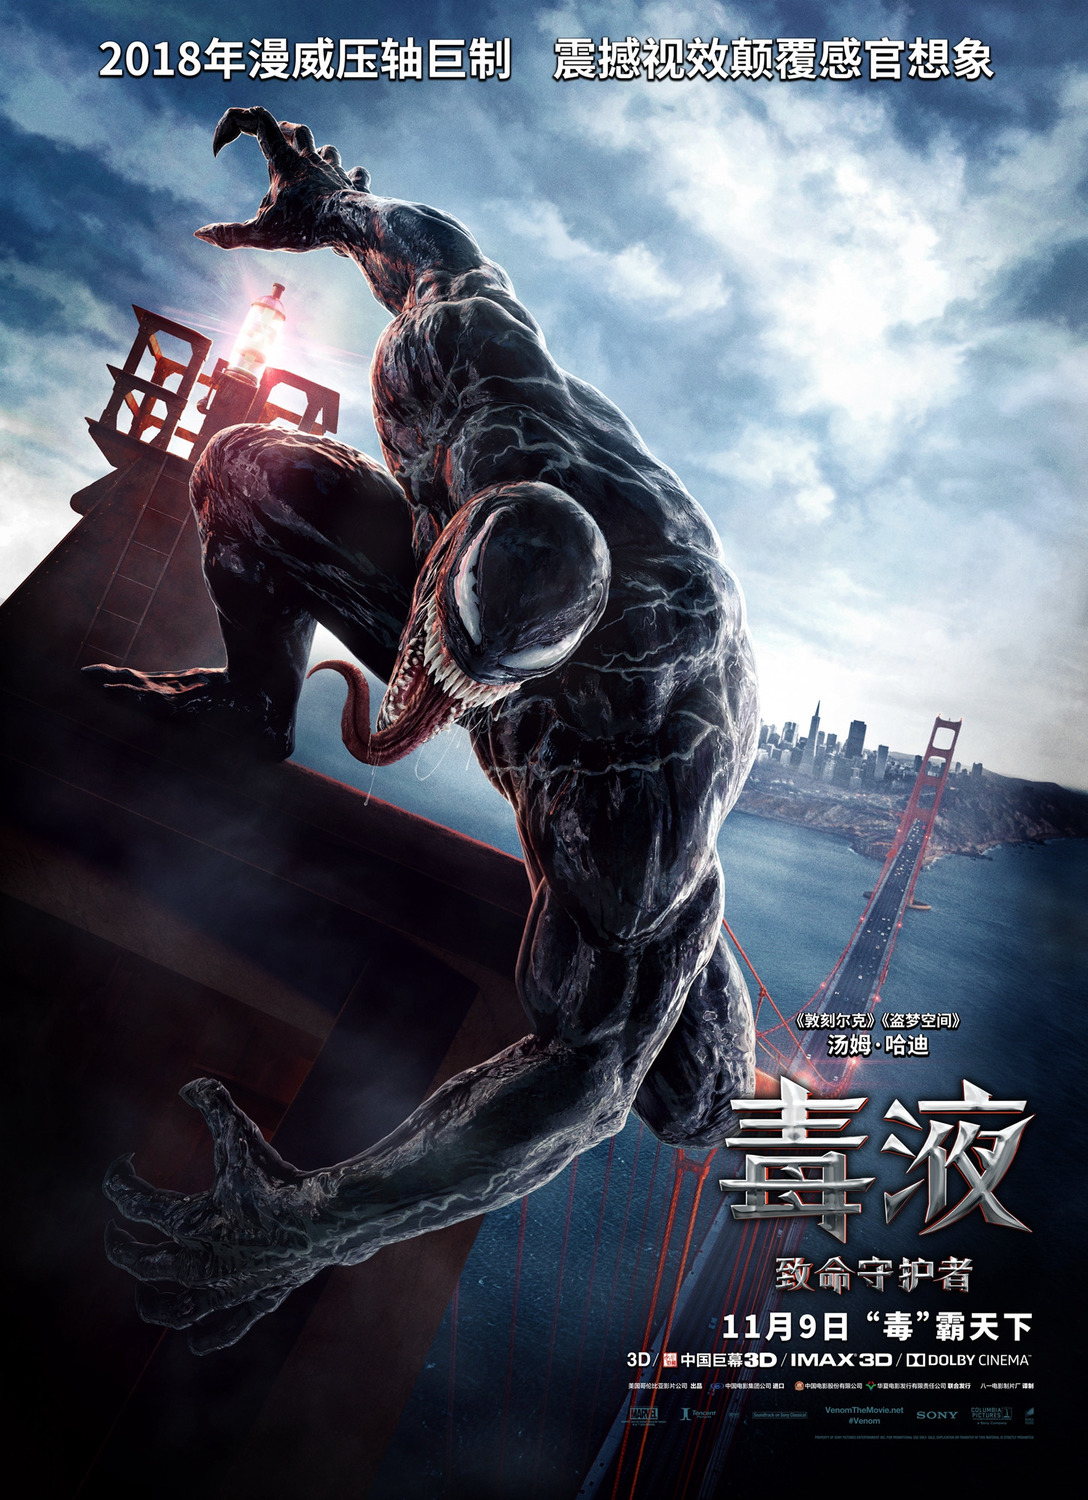 Extra Large Movie Poster Image for Venom (#11 of 14)